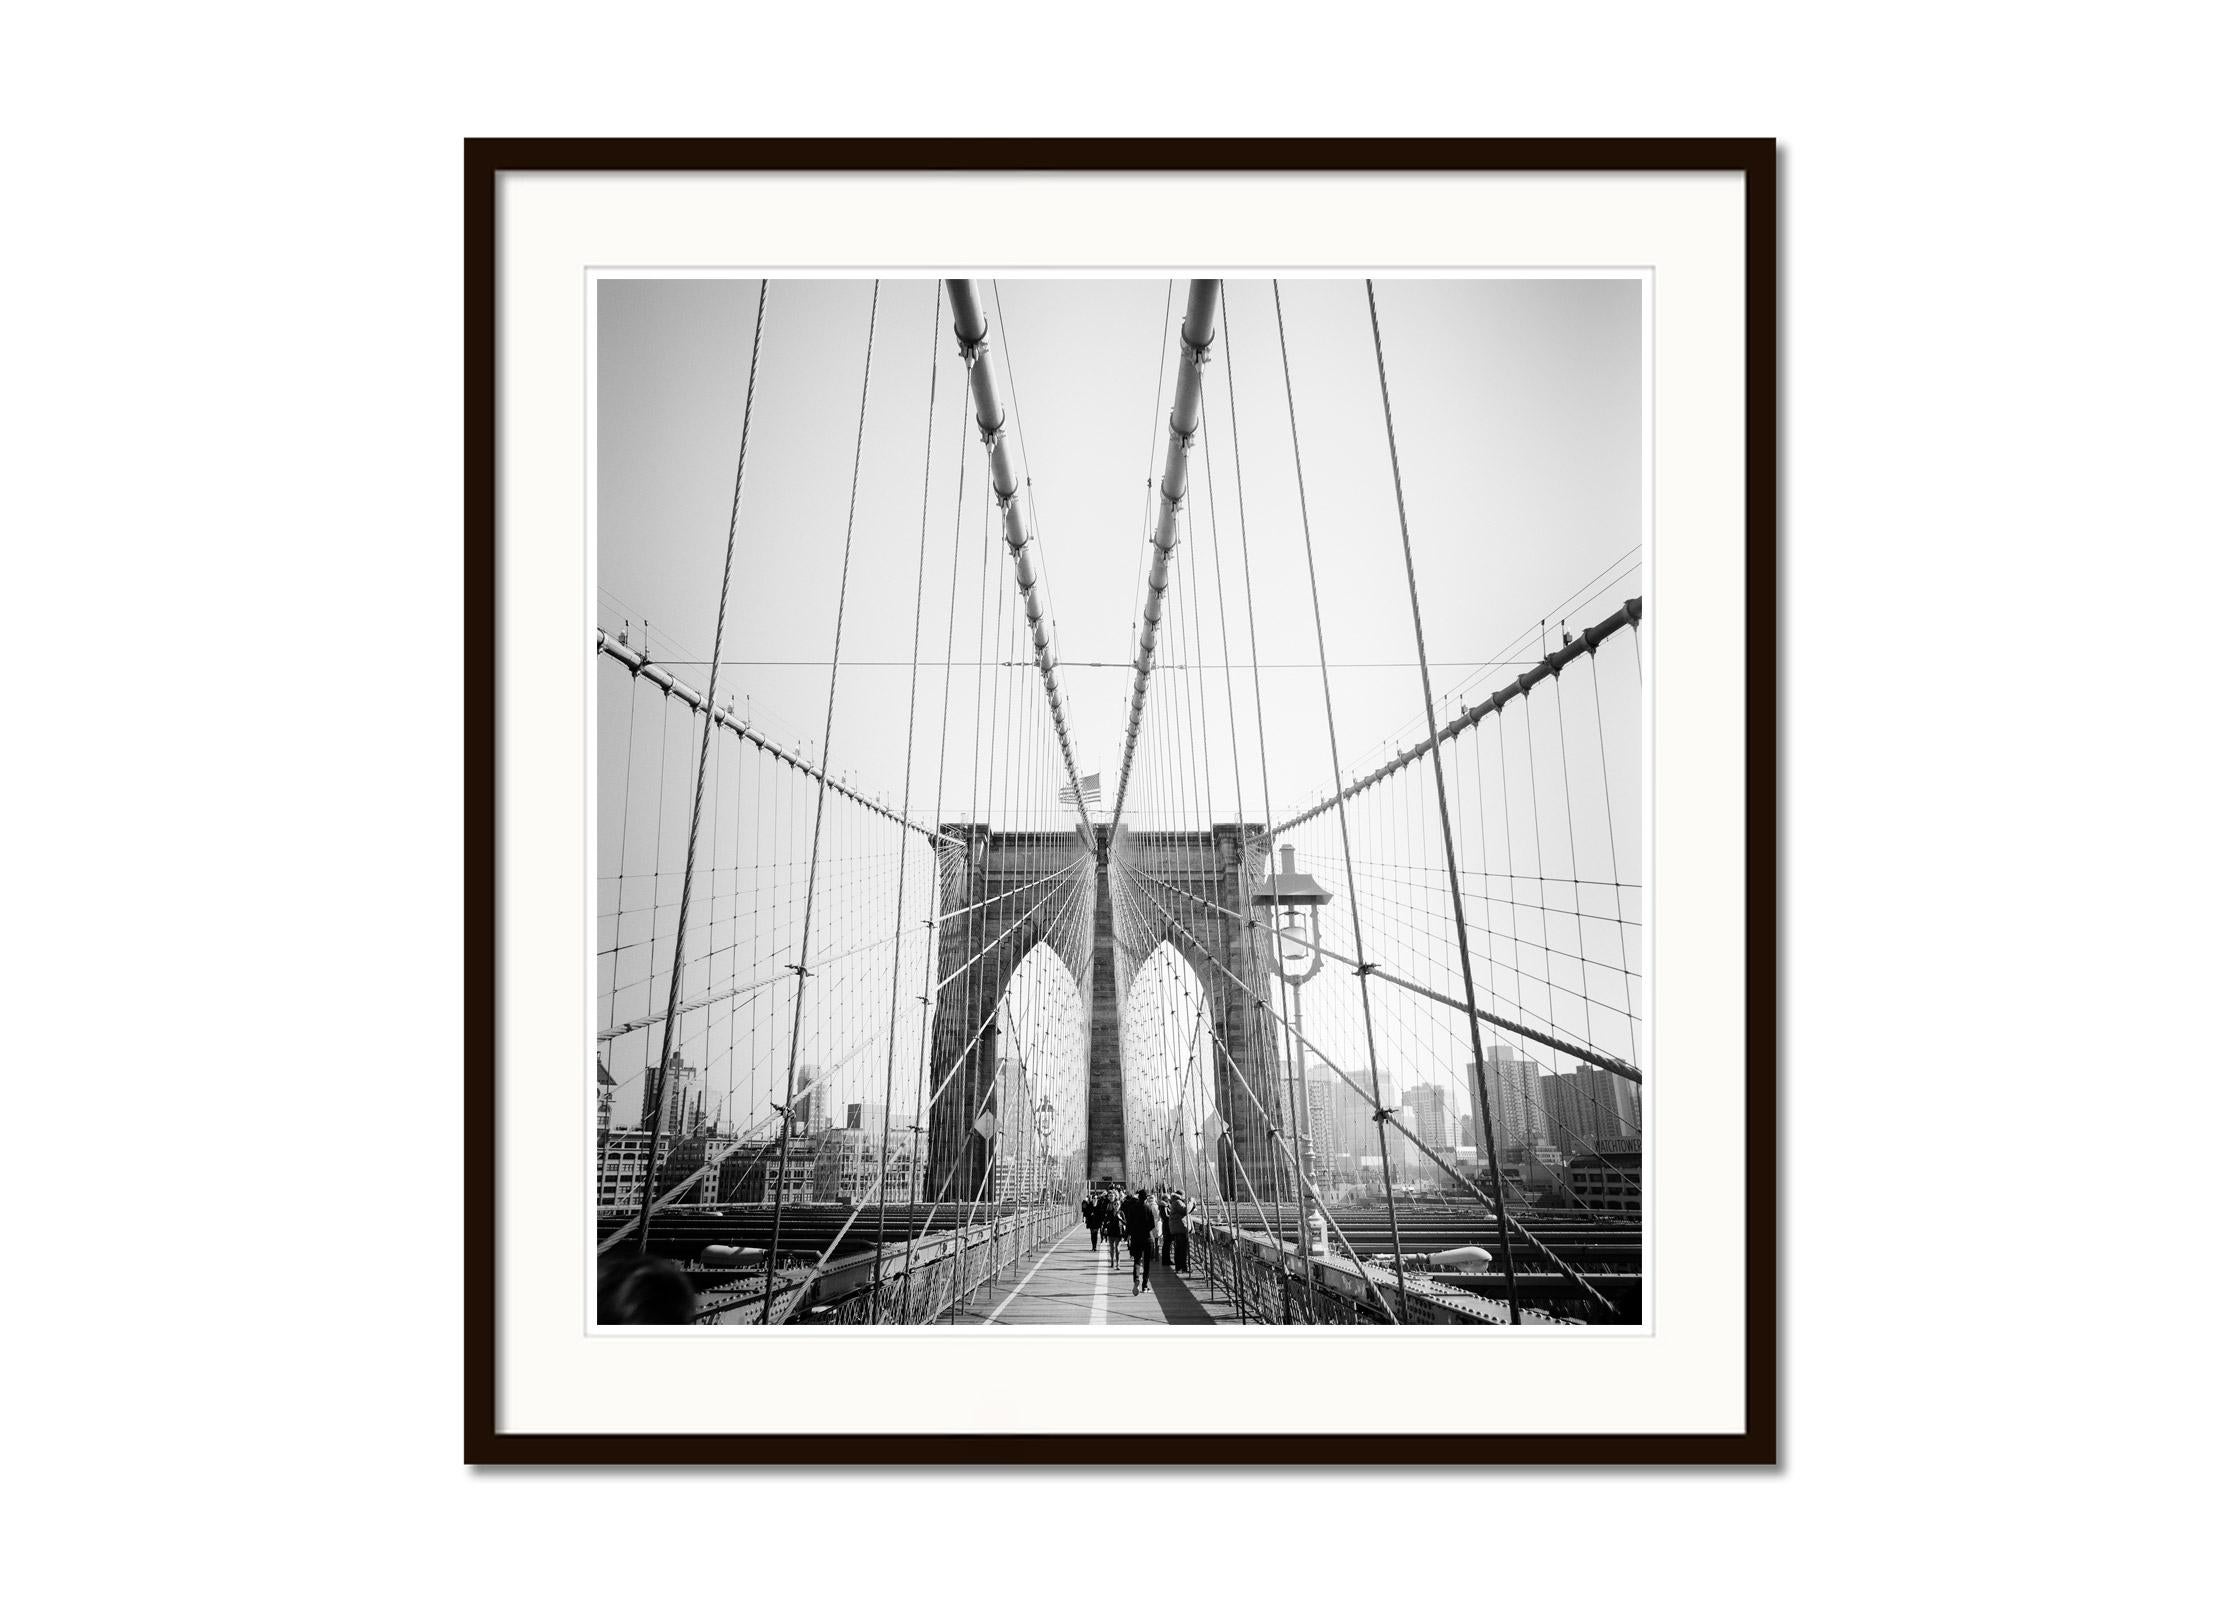 Black and white fine art cityscape - landscape photography. Archival pigment ink print, edition of 9. Signed, titled, dated and numbered by artist. Certificate of authenticity included. Printed with 4cm white border. 
International award winner